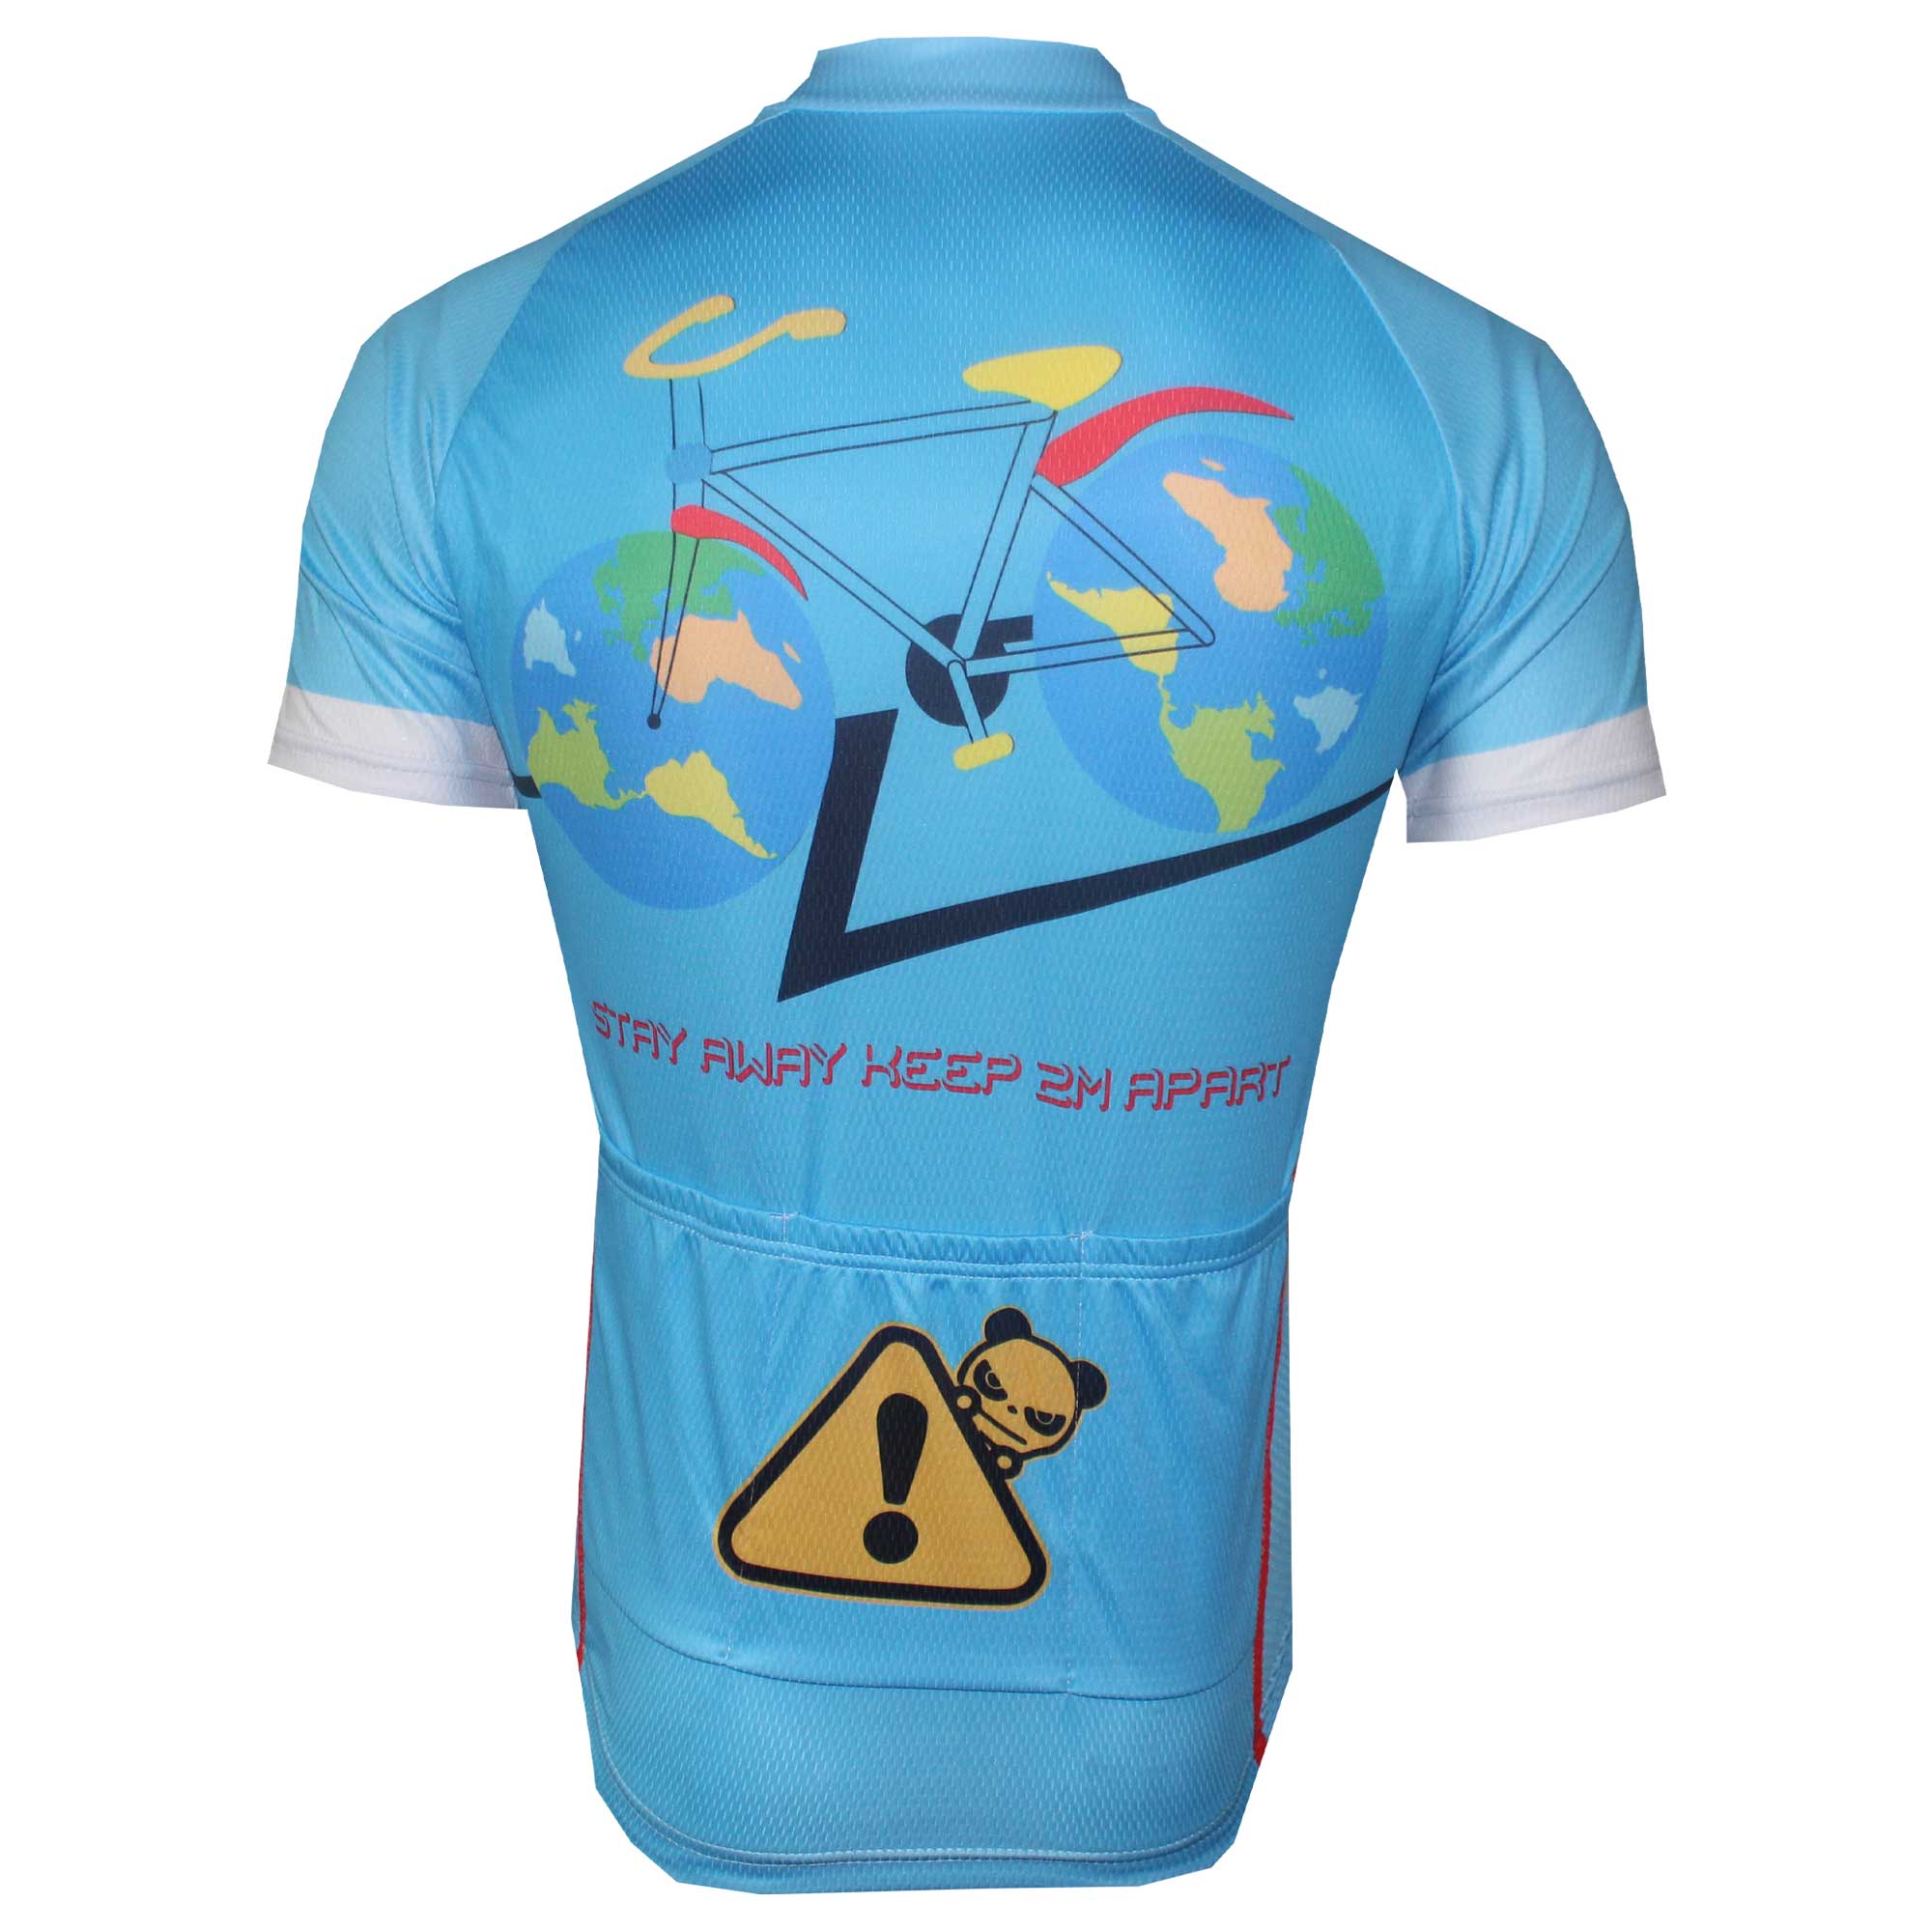 Social Distance Cyclist Cycling Jersey.